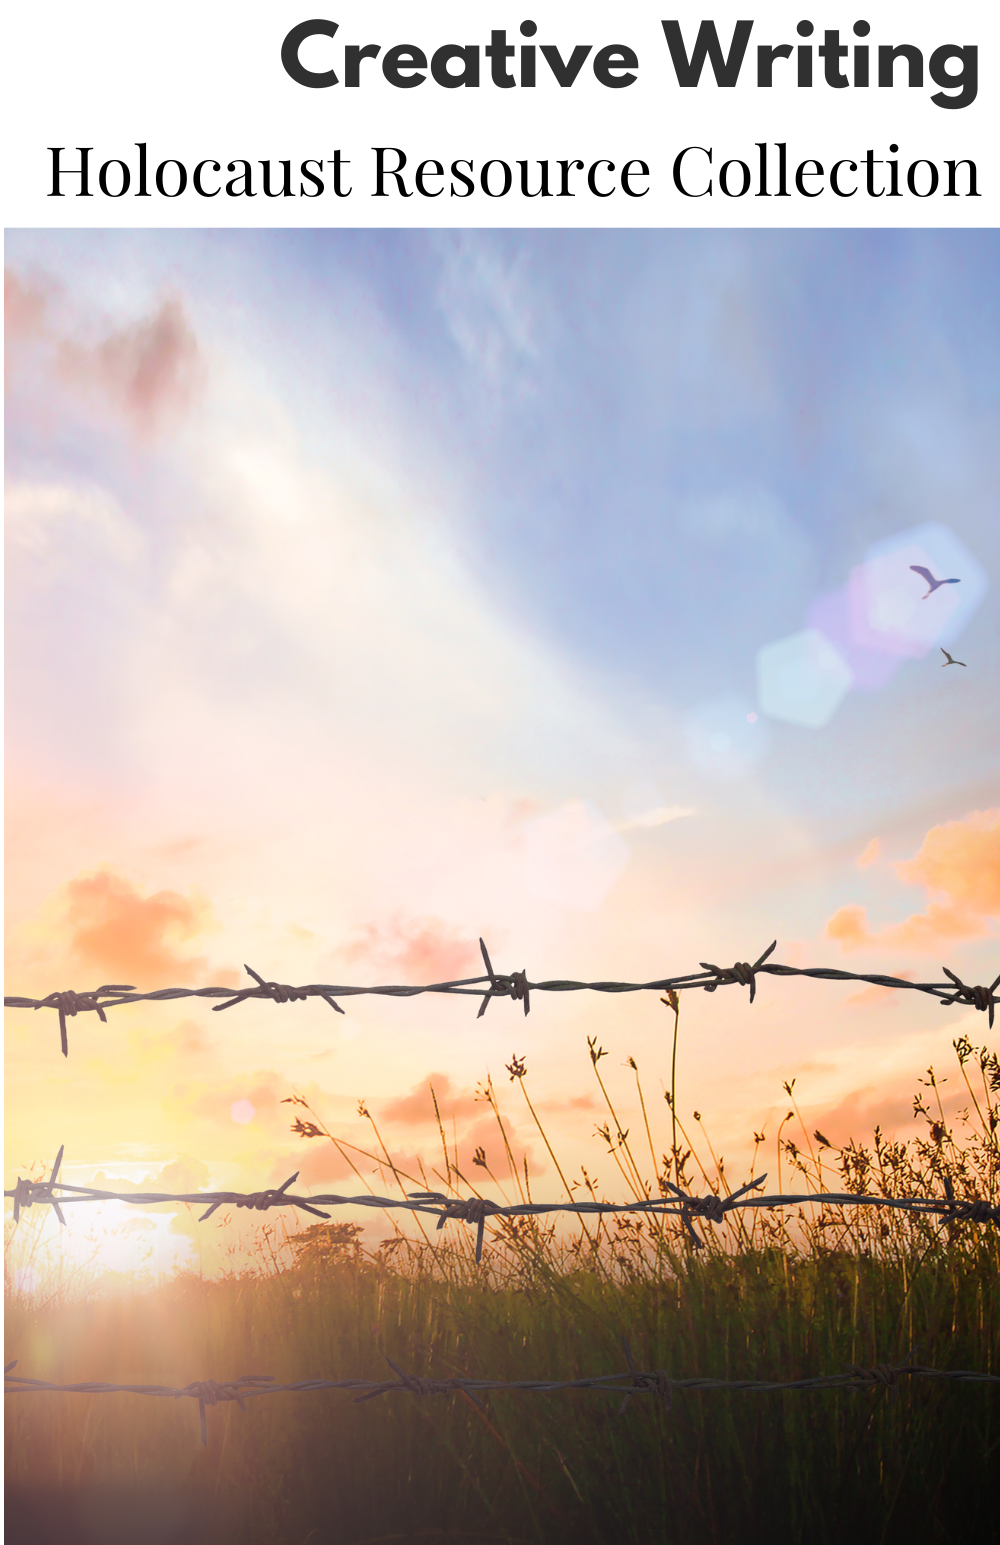 Picture of a sun setting over a field with two birds flying in the edge of the photo and barbed wire in the foreground. 